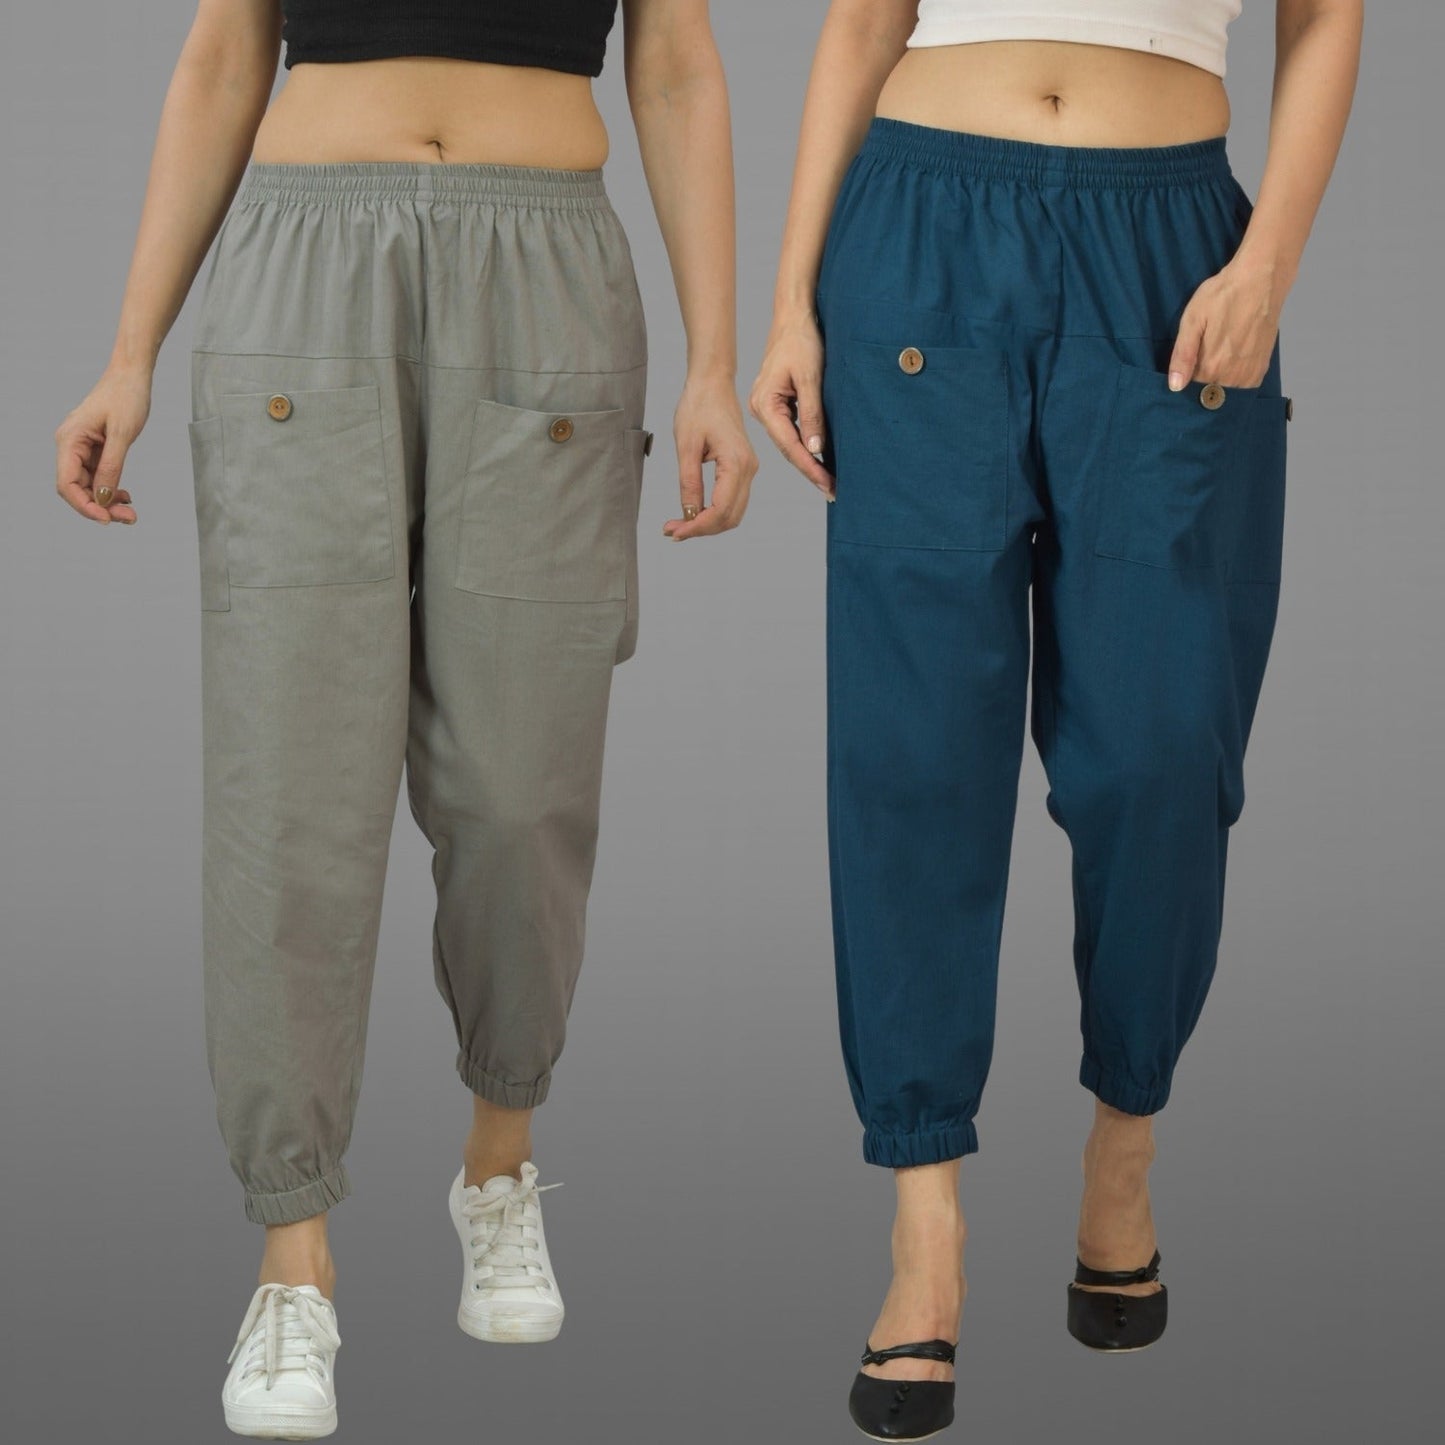 Combo Pack Of Womens Grey And Teal Blue Four Pocket Cotton Cargo Pants